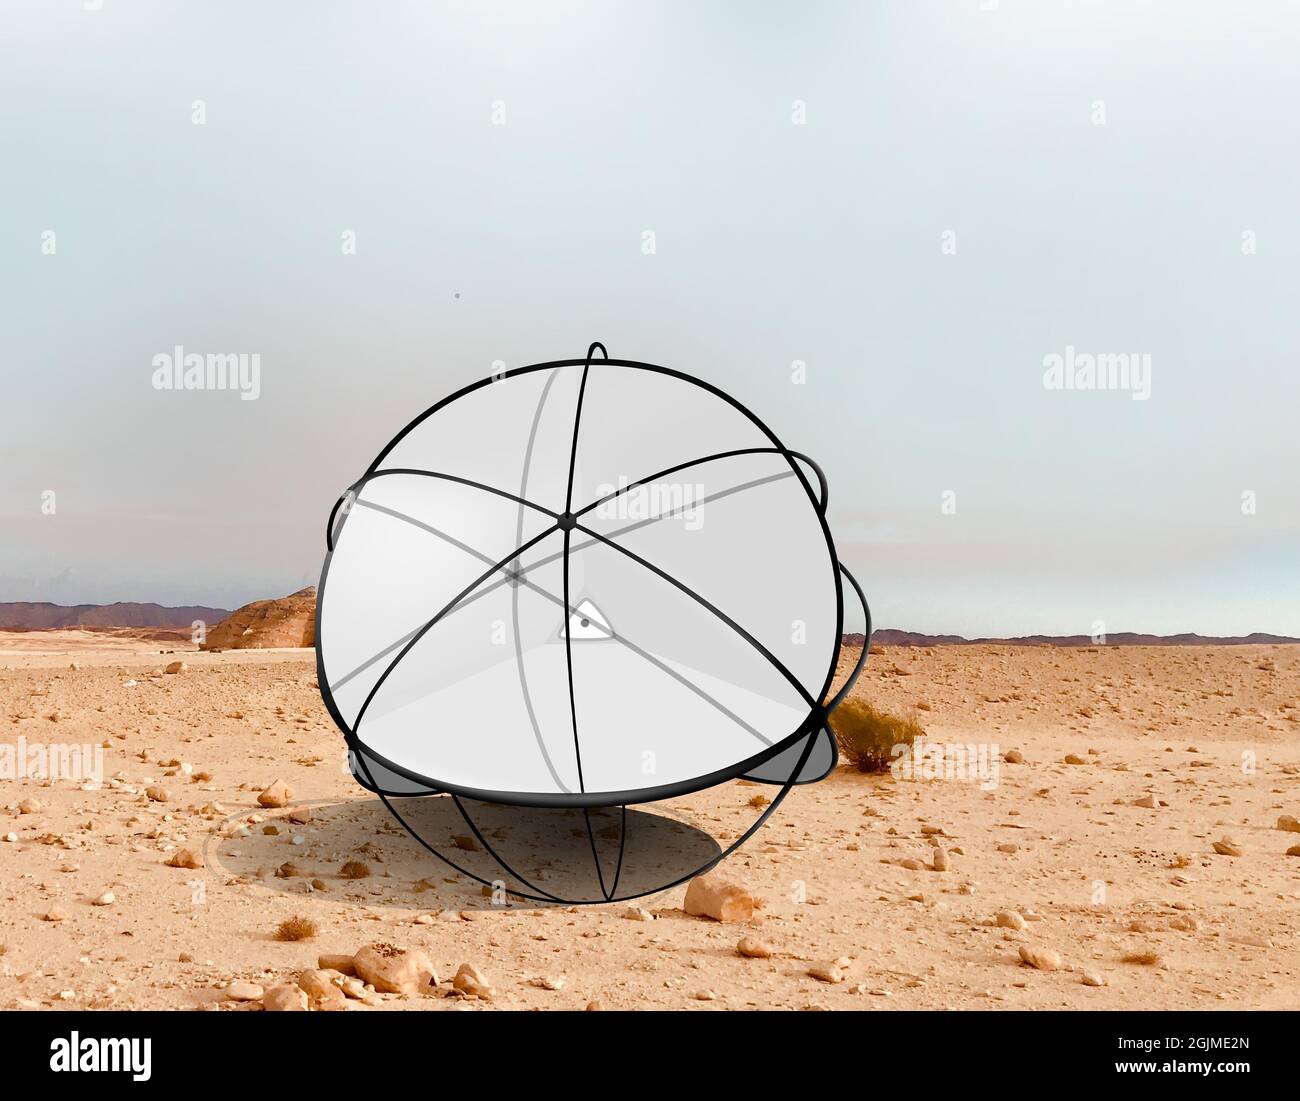 Tumbleweed Robot in desert to help prevent desertification.  Ball filled with small sails that easily catch a breeze. Stock Photo